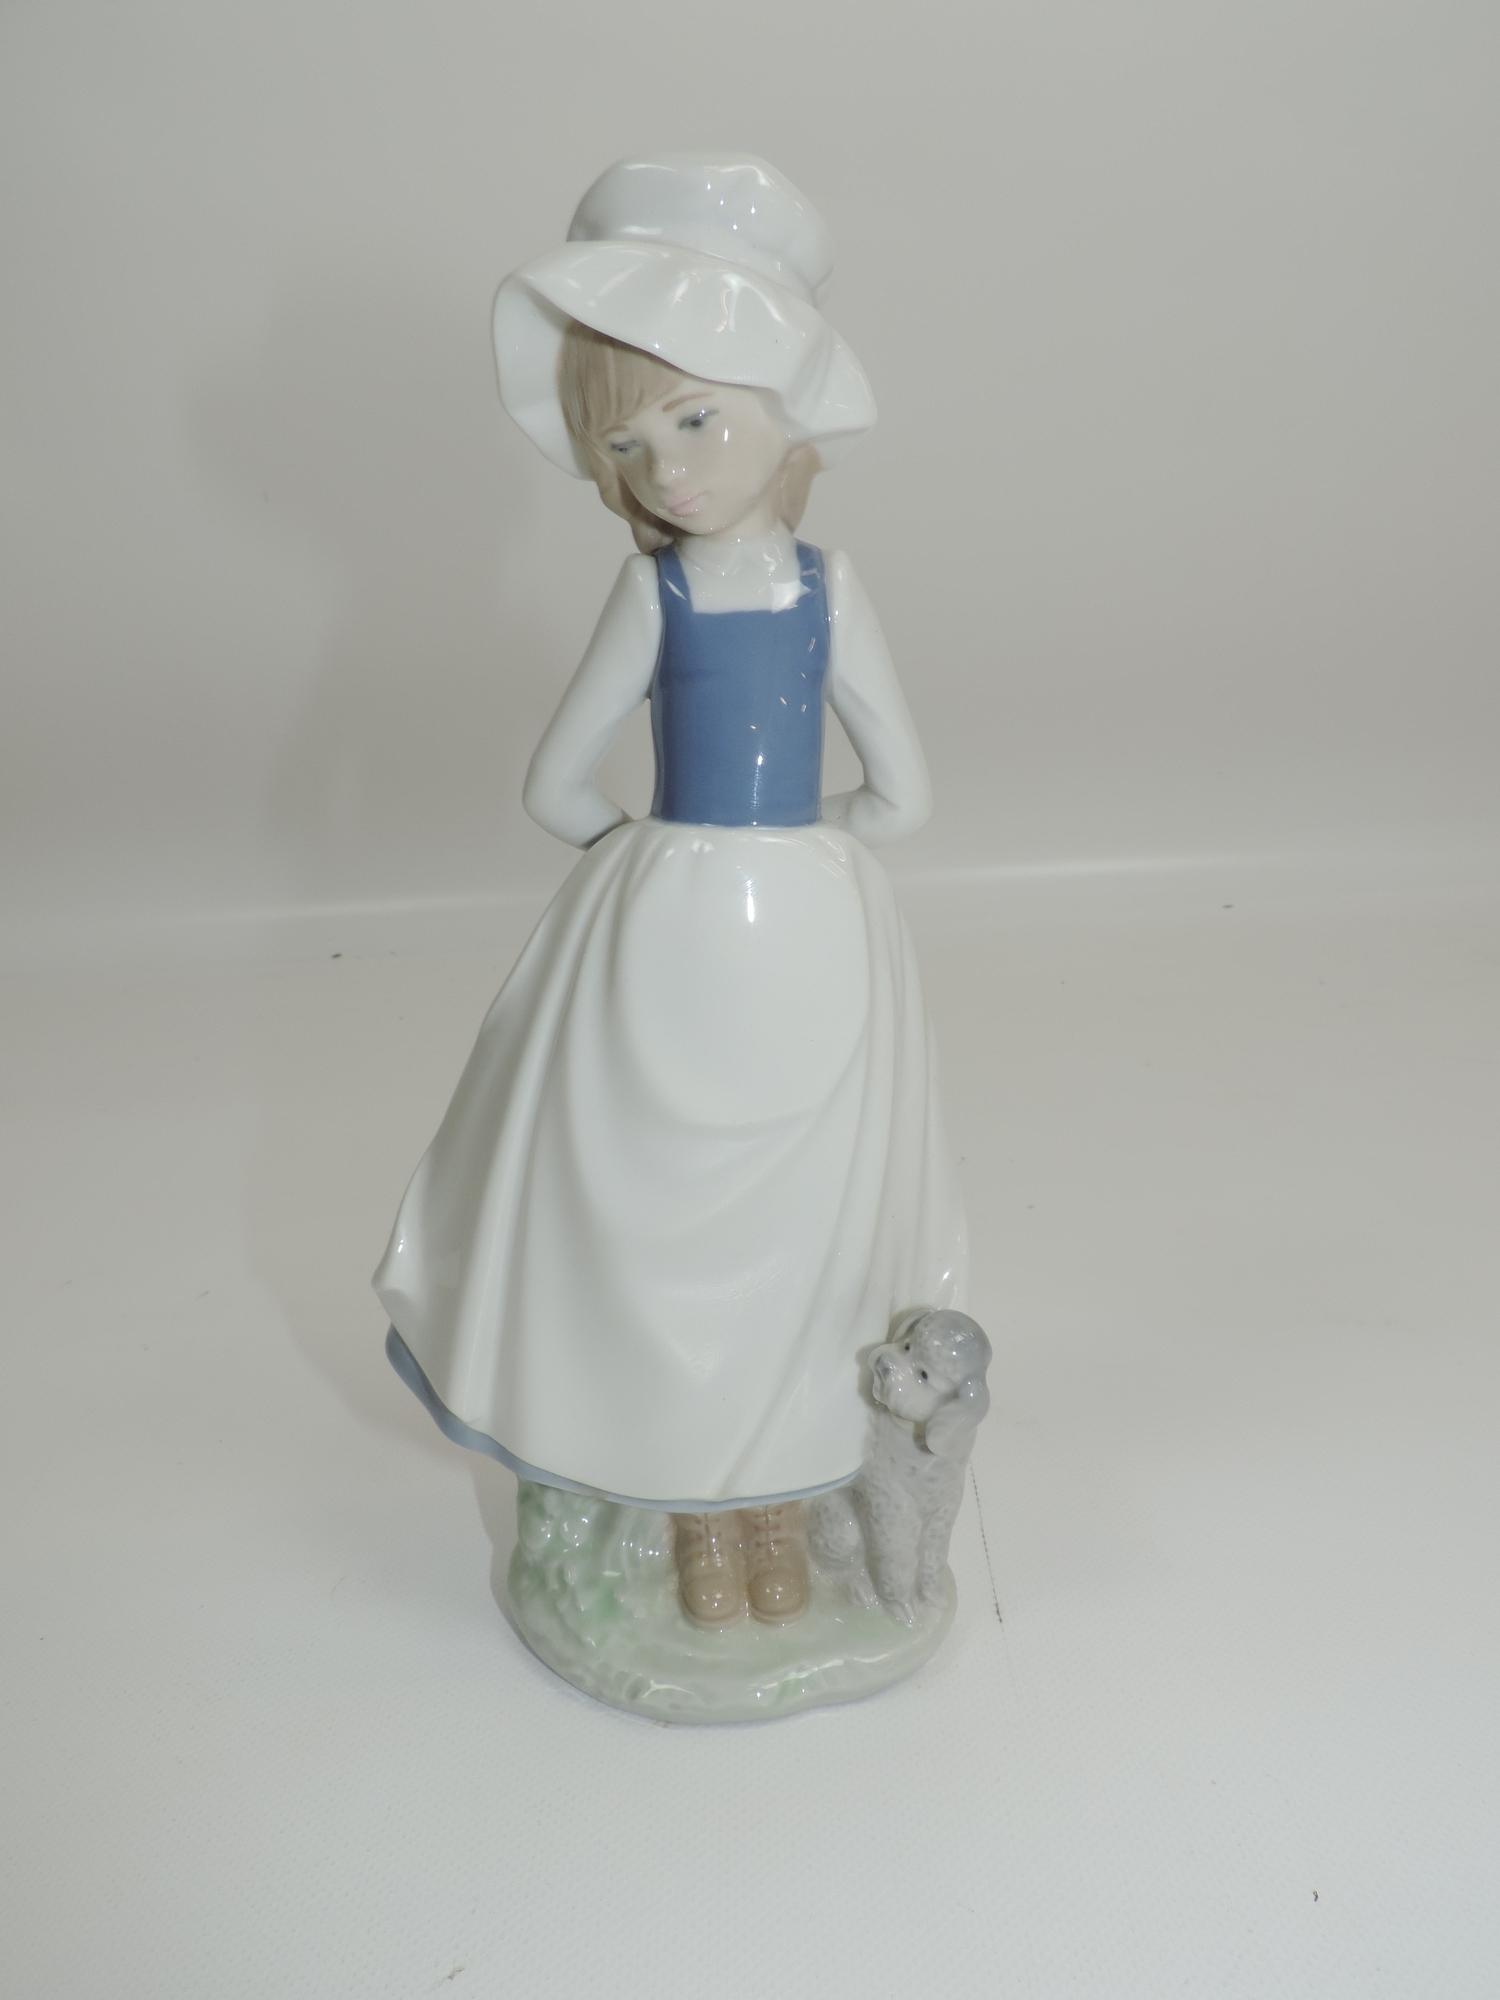 2x Spanish Porcelain Figures - One Miguel and Other Is Lladro (Hands Missing on Lladro) - Image 5 of 8